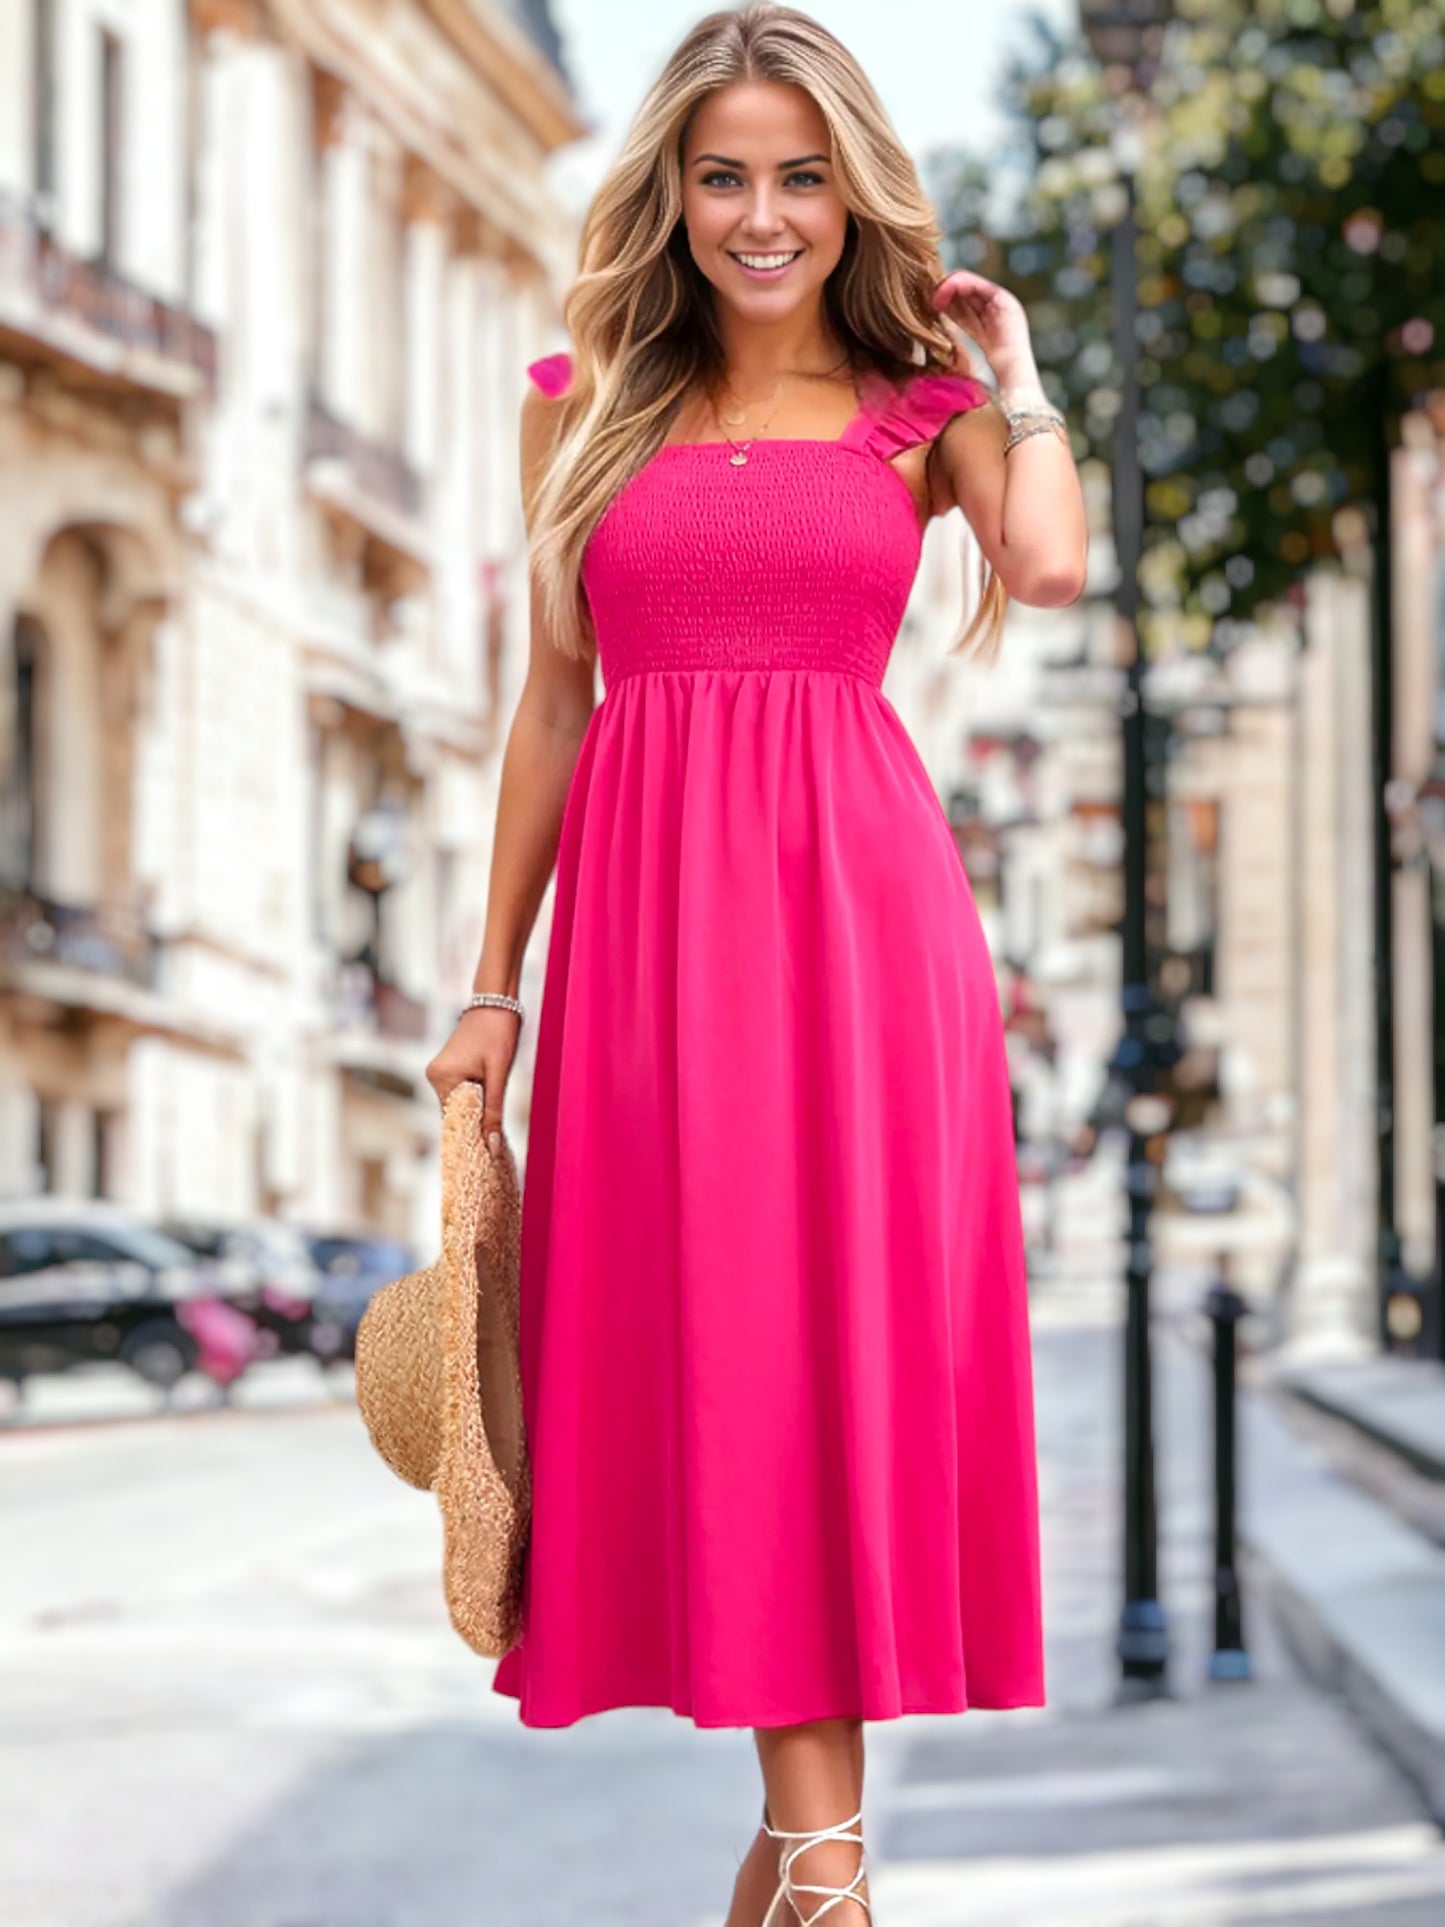 Solid Color Ruffle Strap Dress